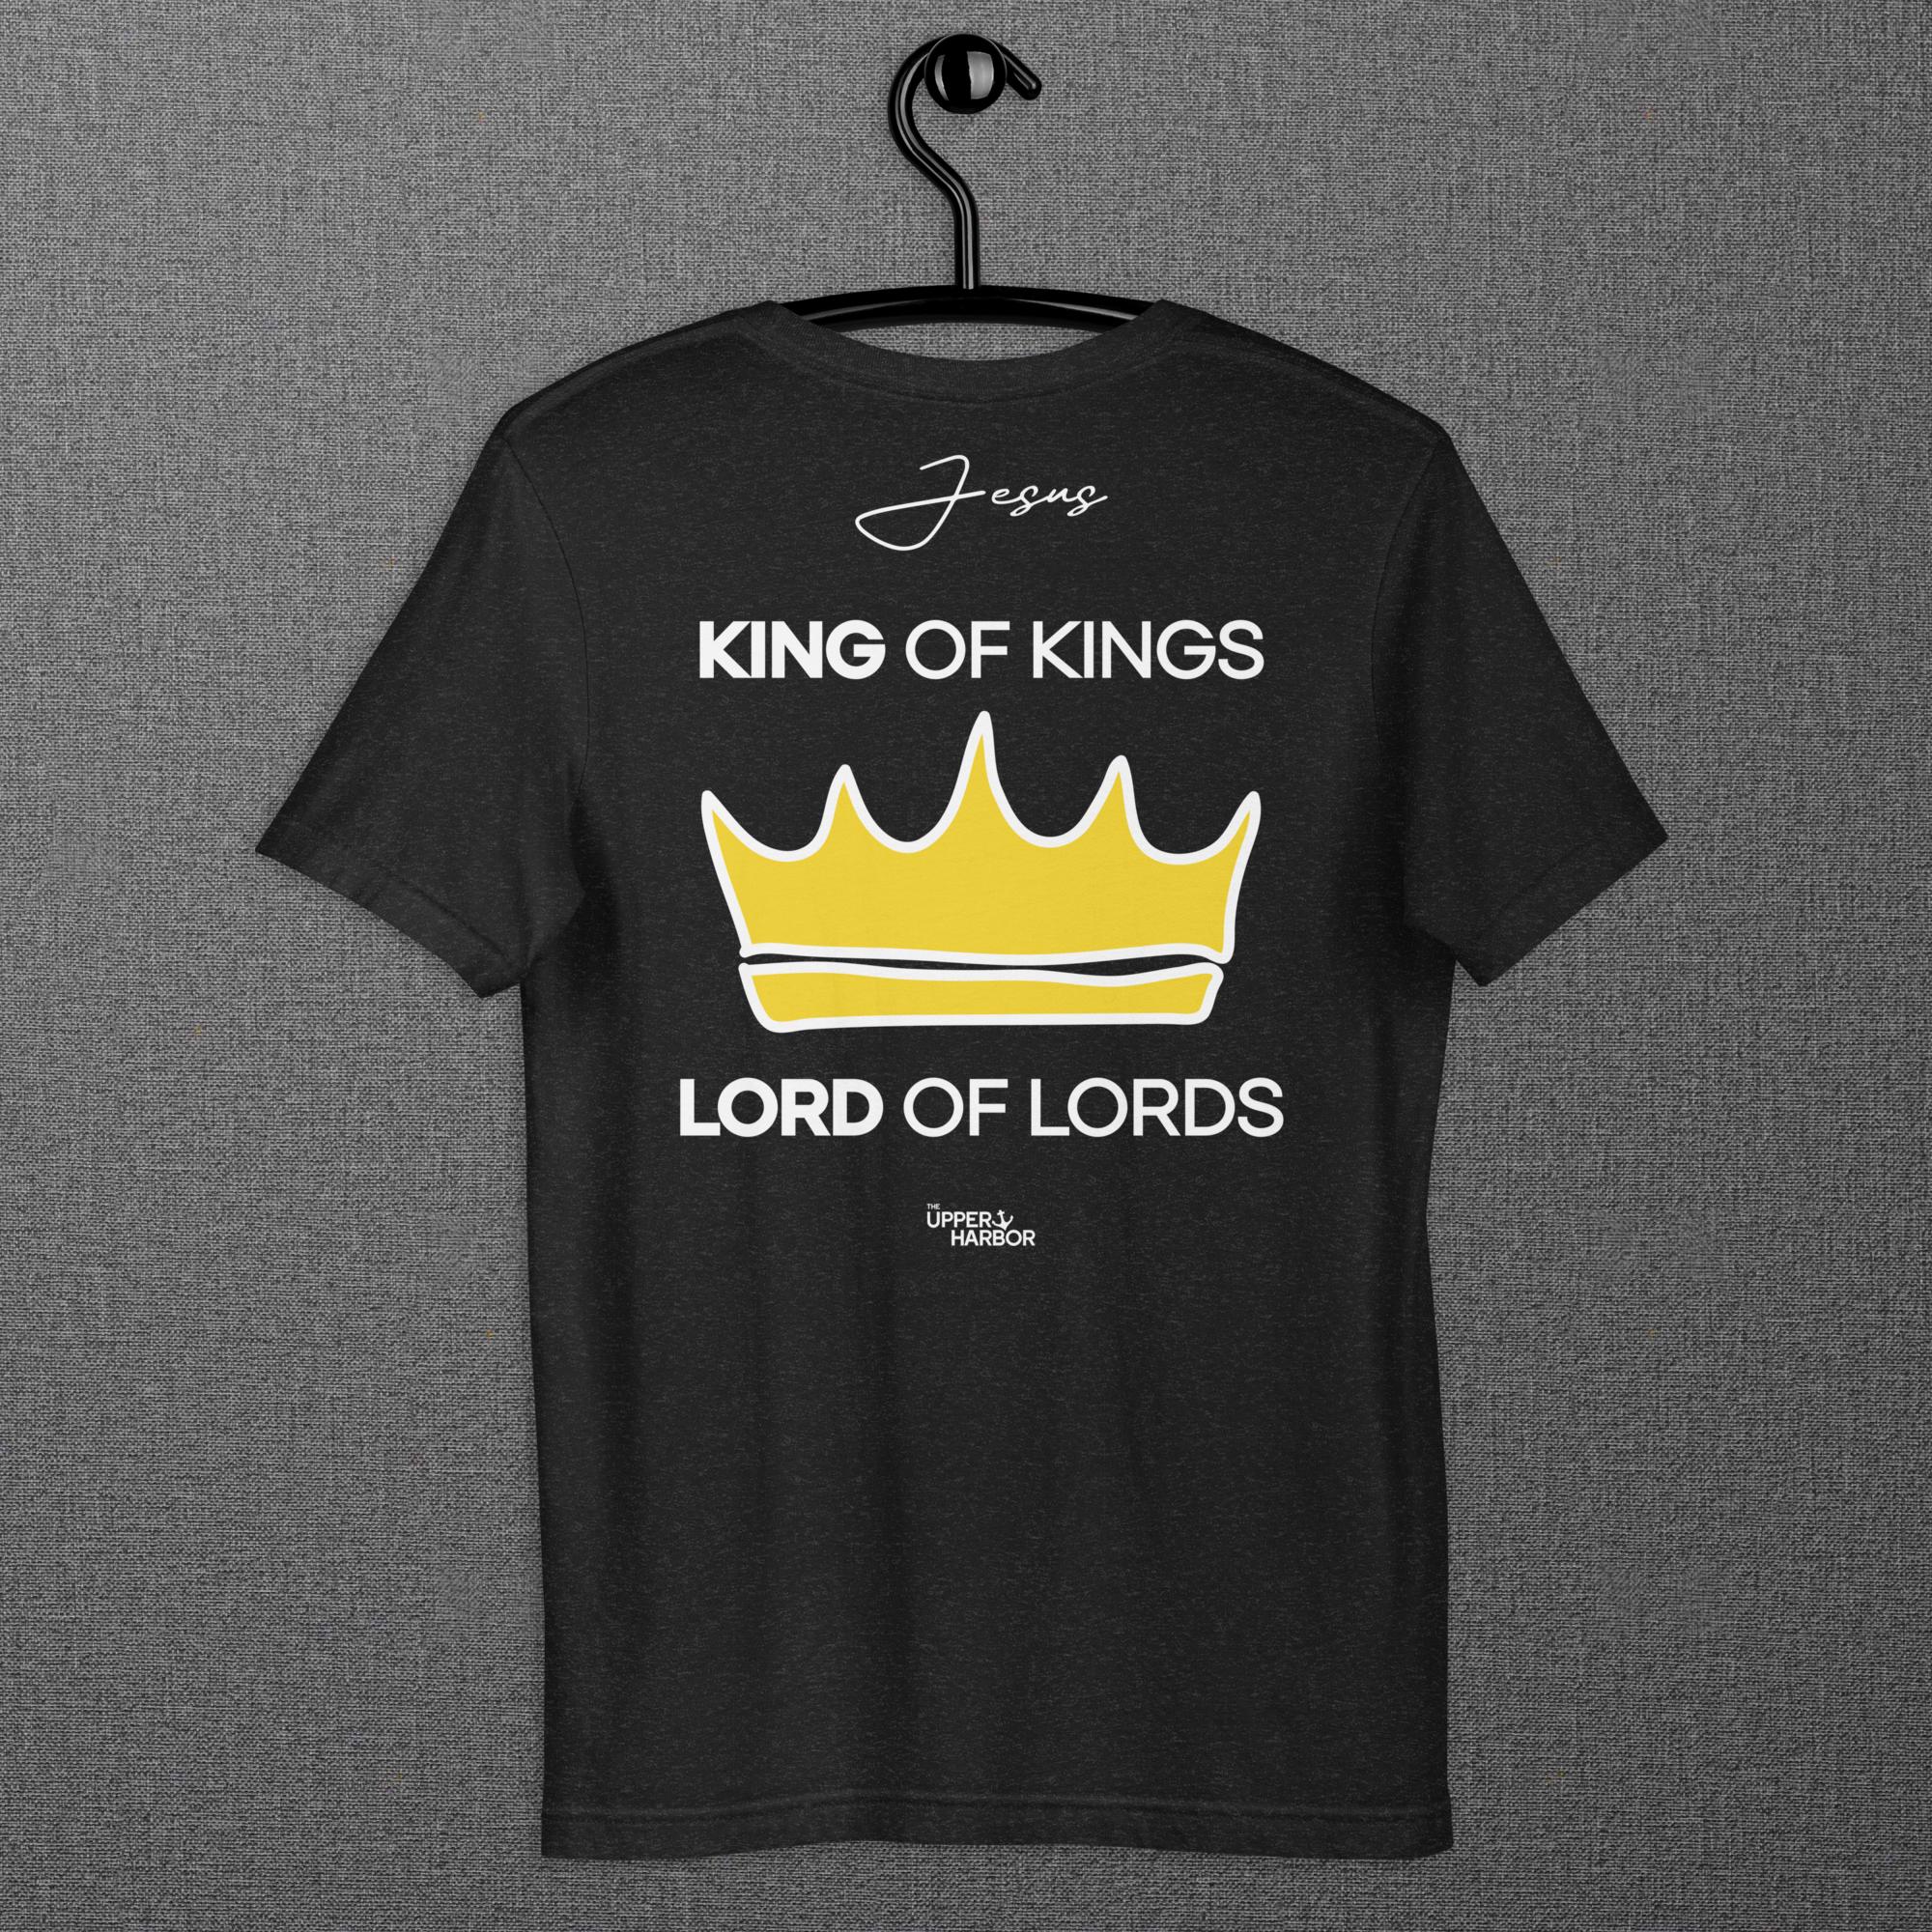 King of kings, Lord of lords (White Font)